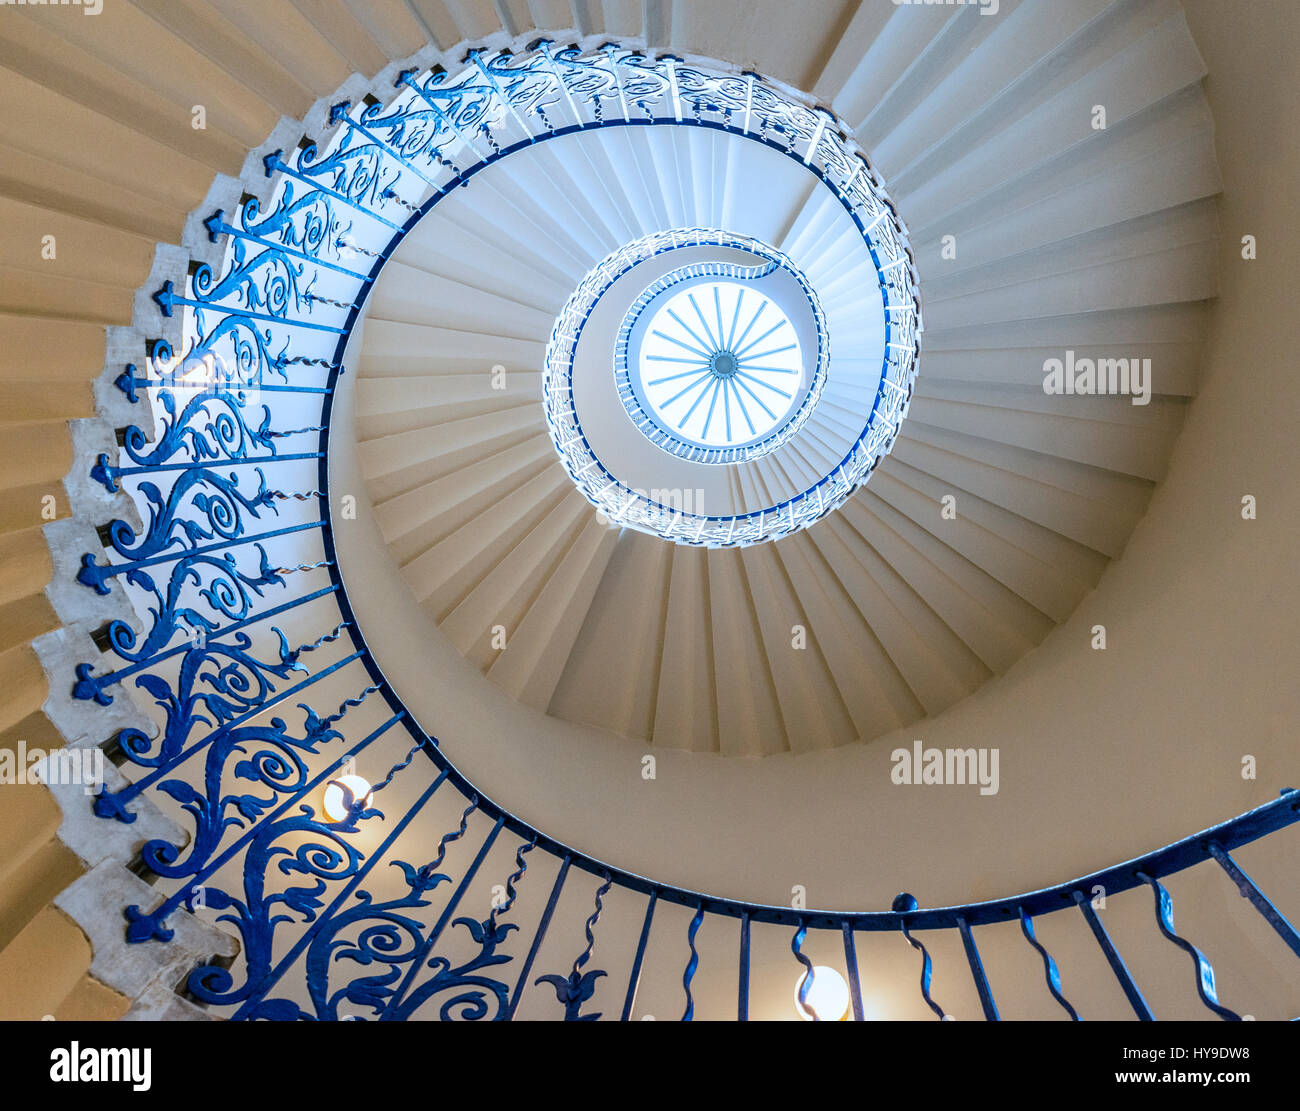 The Tulip Stairs in Queen's House, Greenwich, London, England, UK. Stock Photo